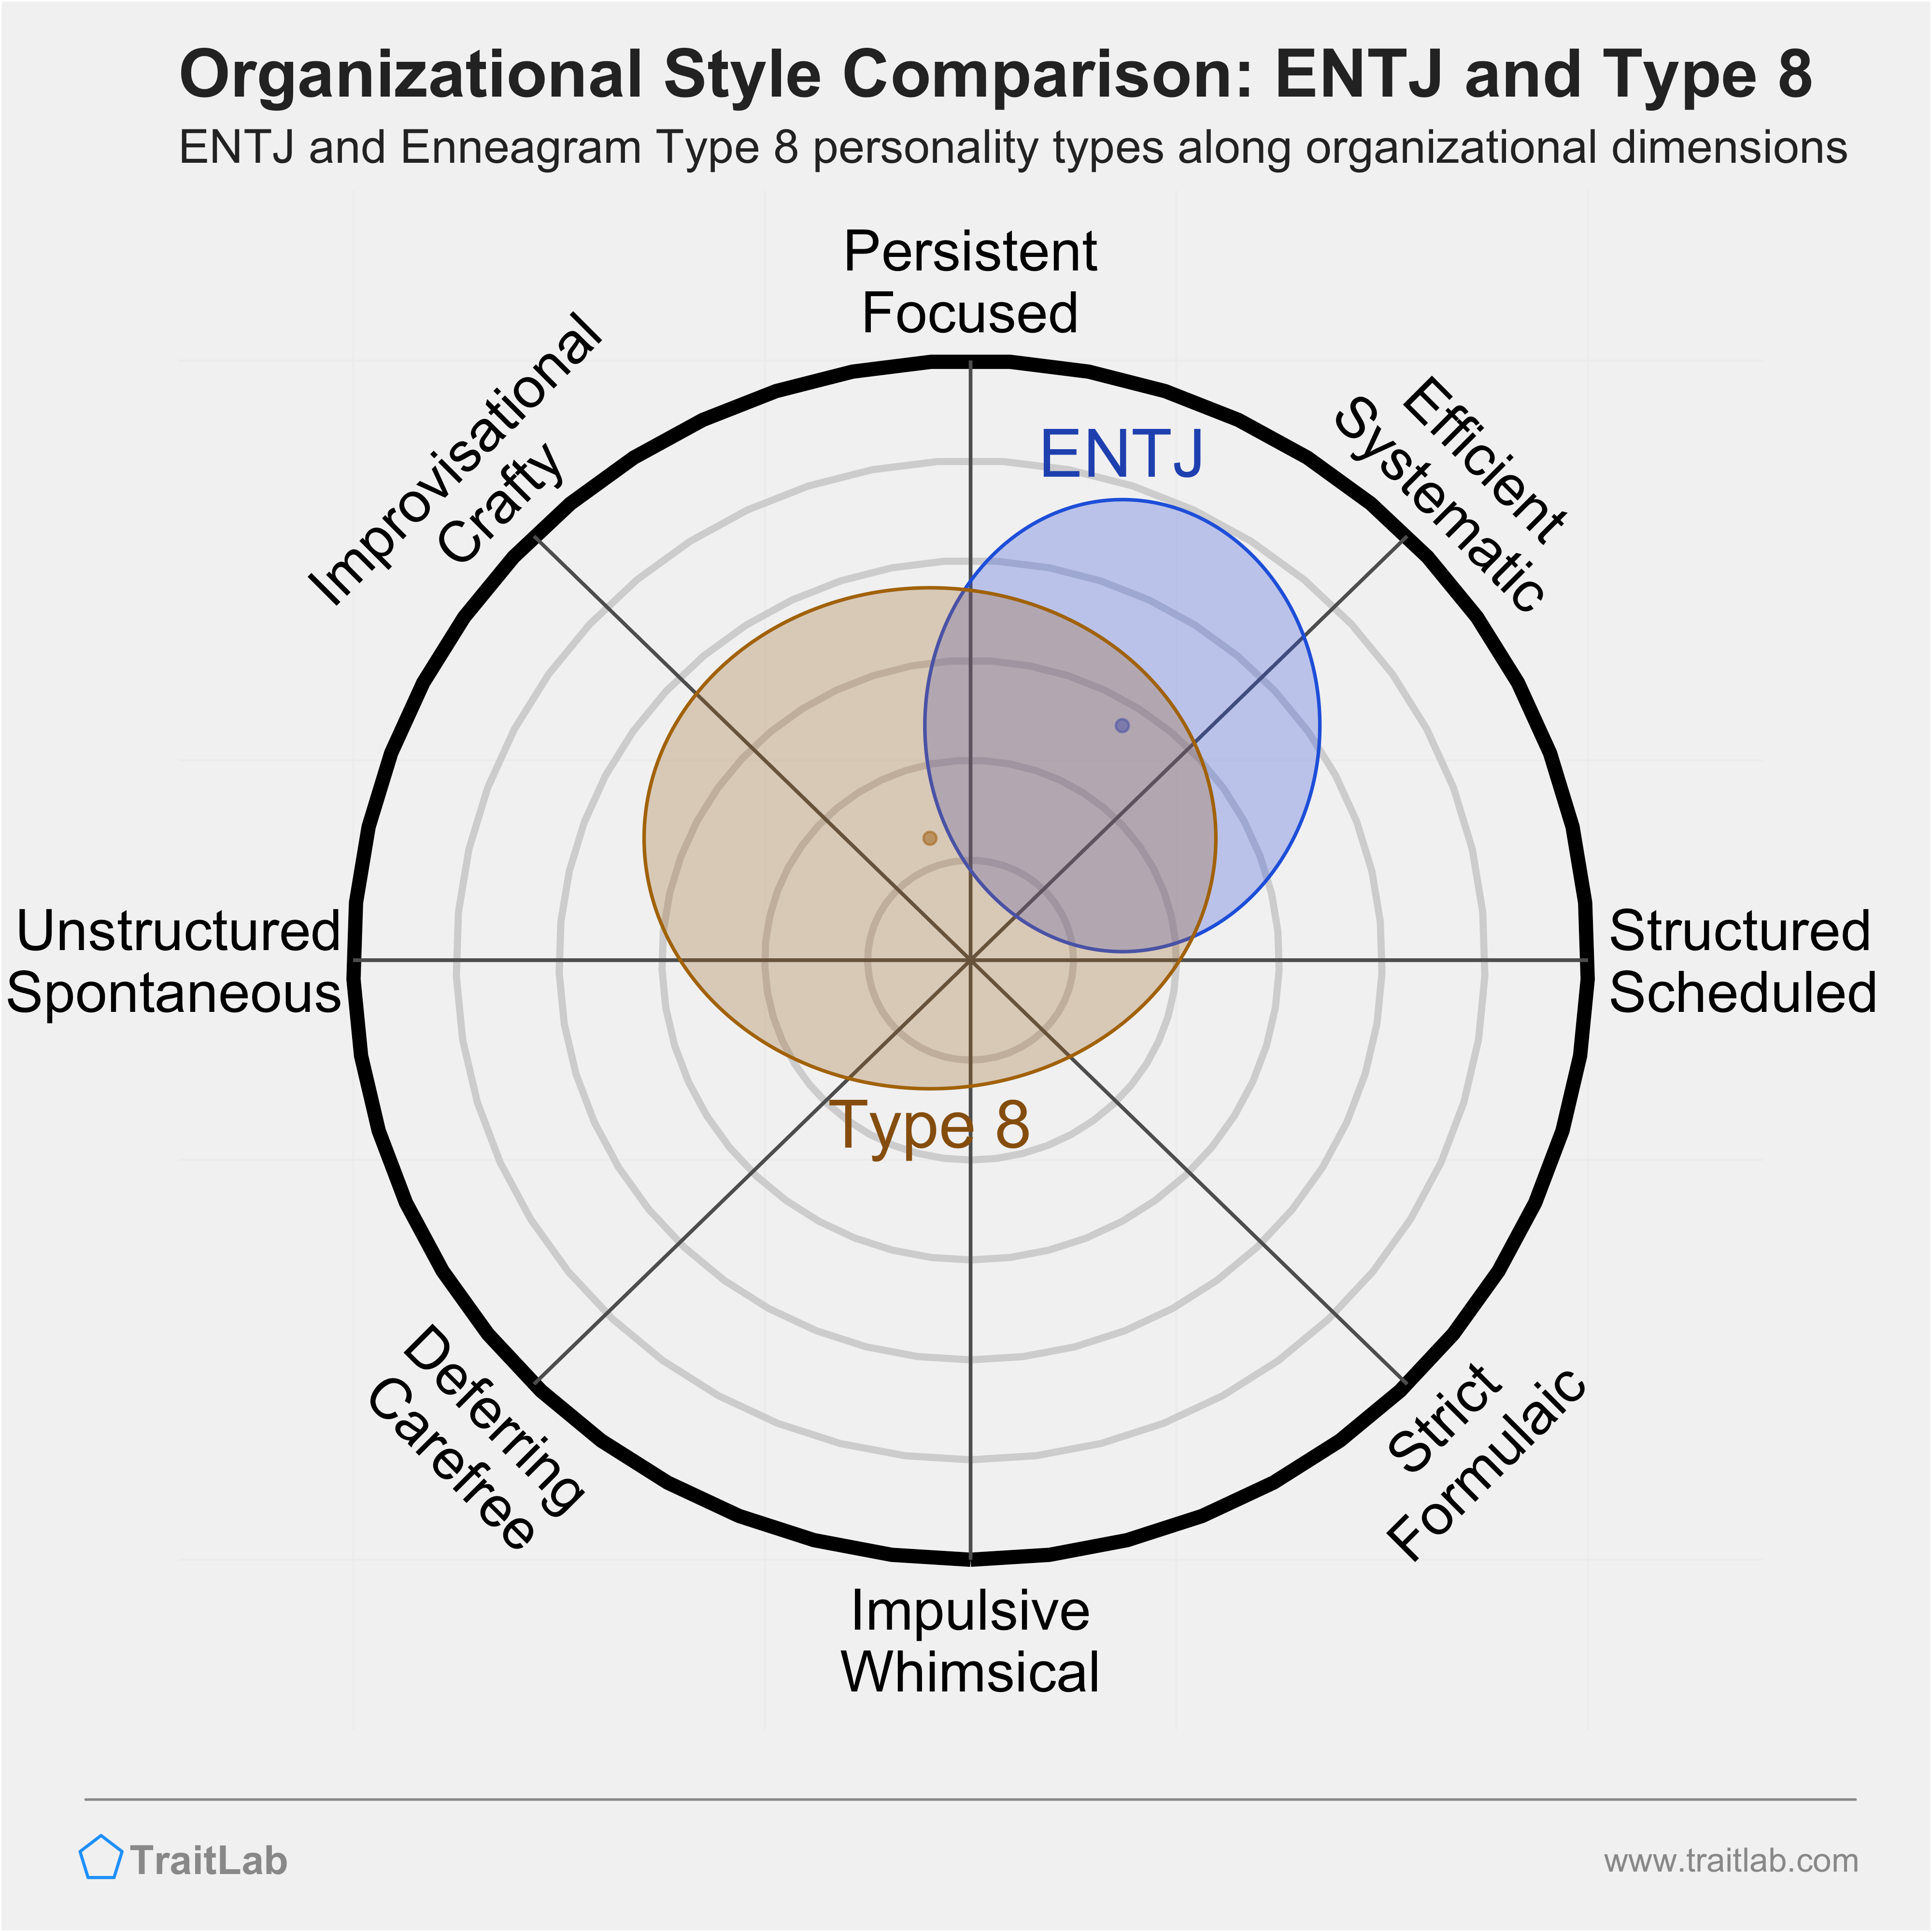 ENTJ and Type 8 comparison across organizational dimensions